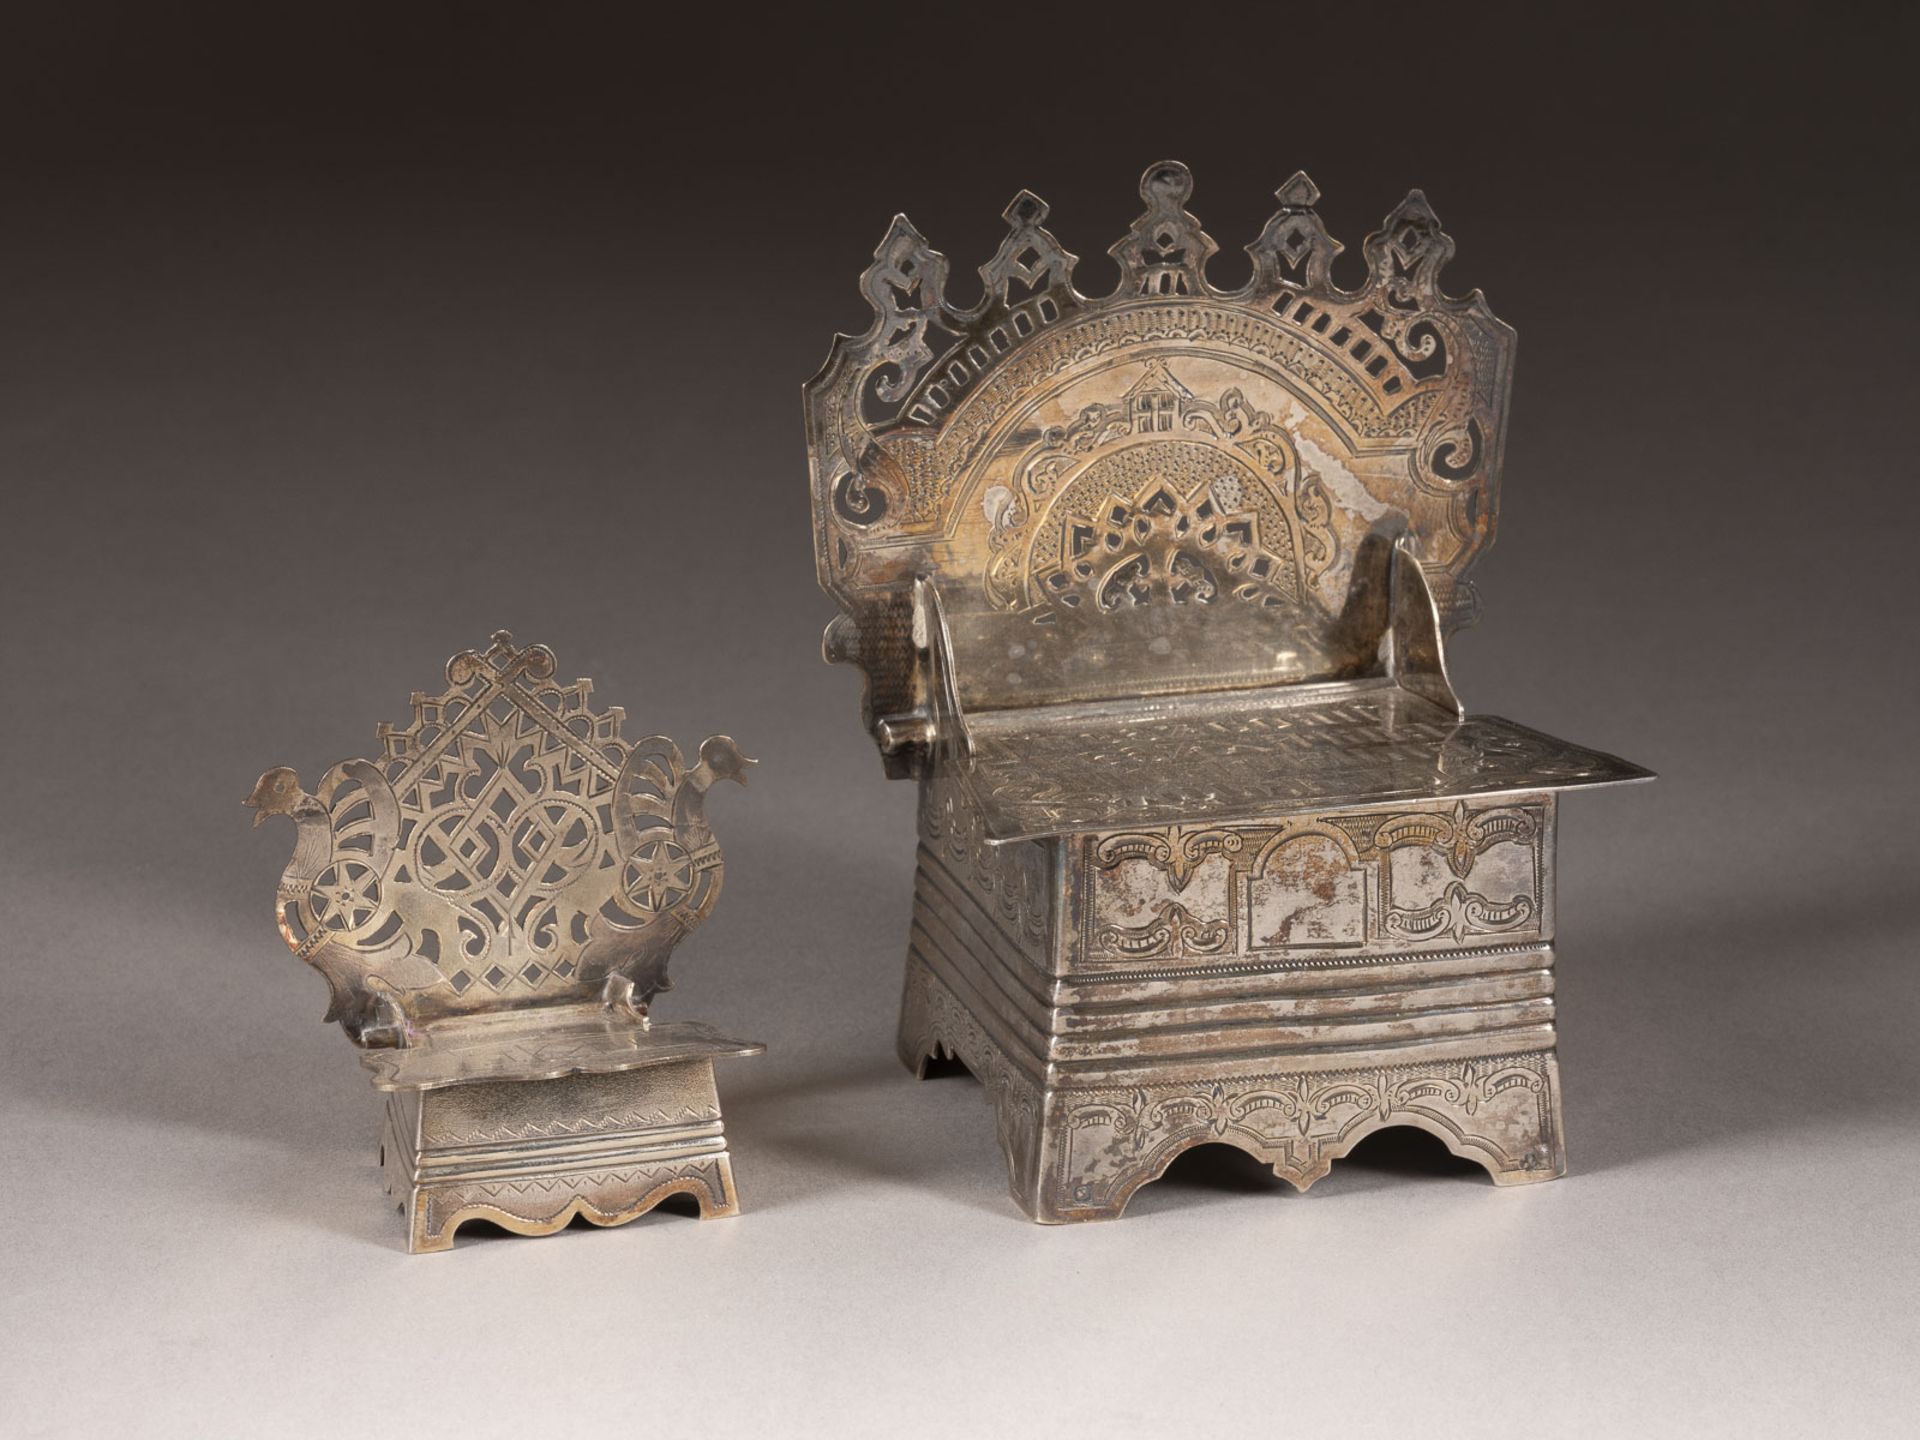 TWO SILVER SALT CHAIRS